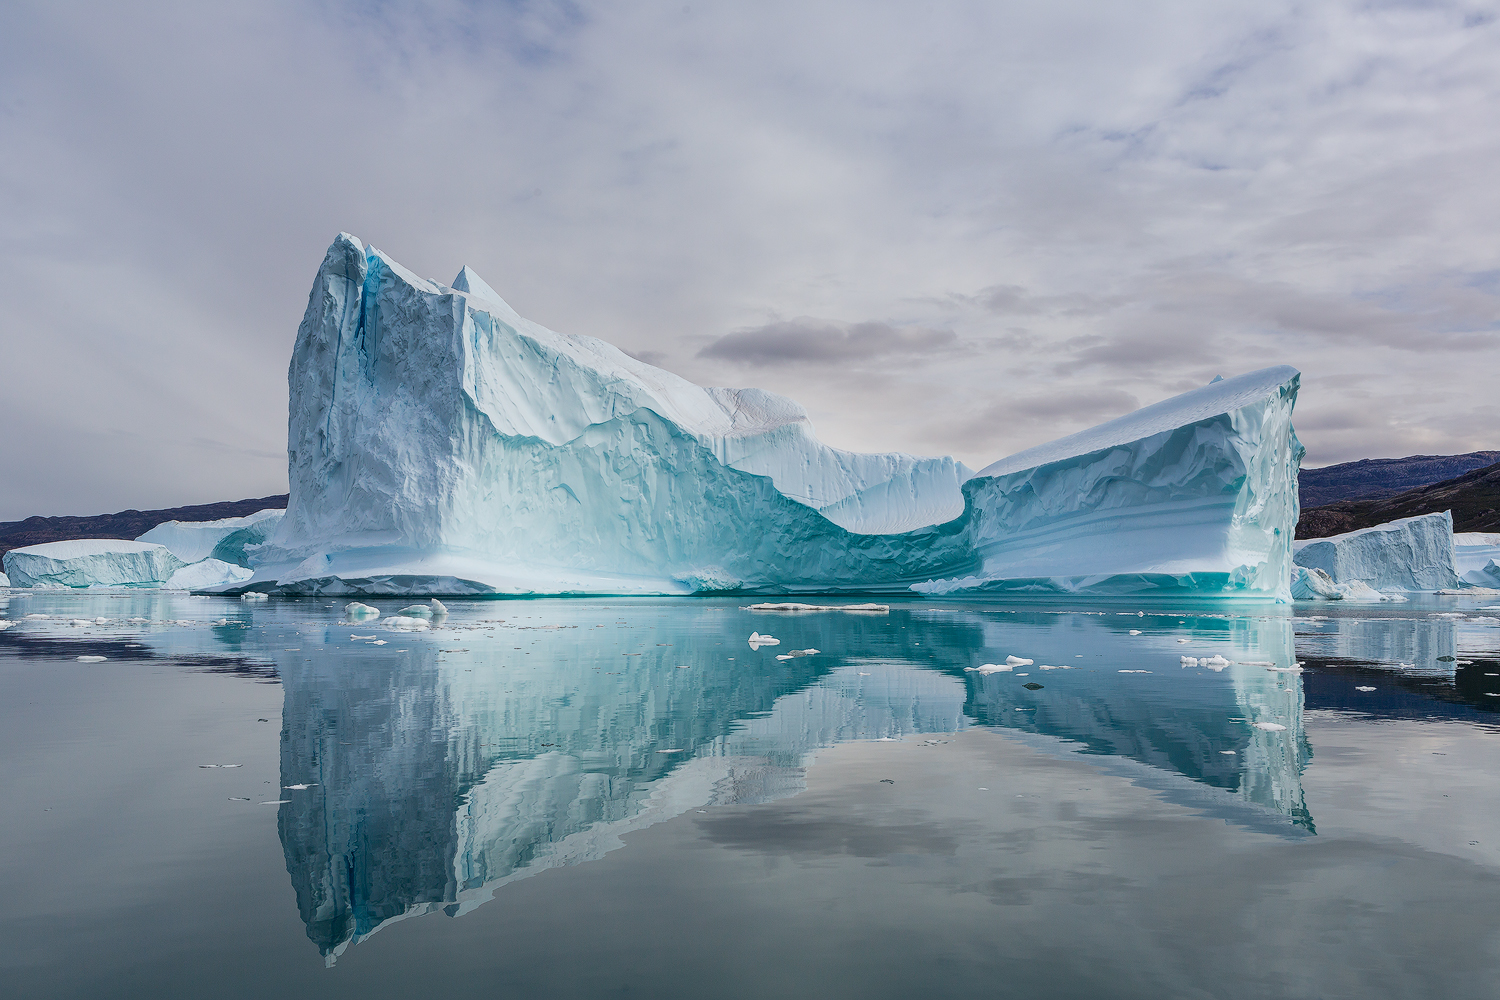 Epic 10 Day Greenland Sailing Trip & Photography Workshop with Transfer from Reykjavik - day 3